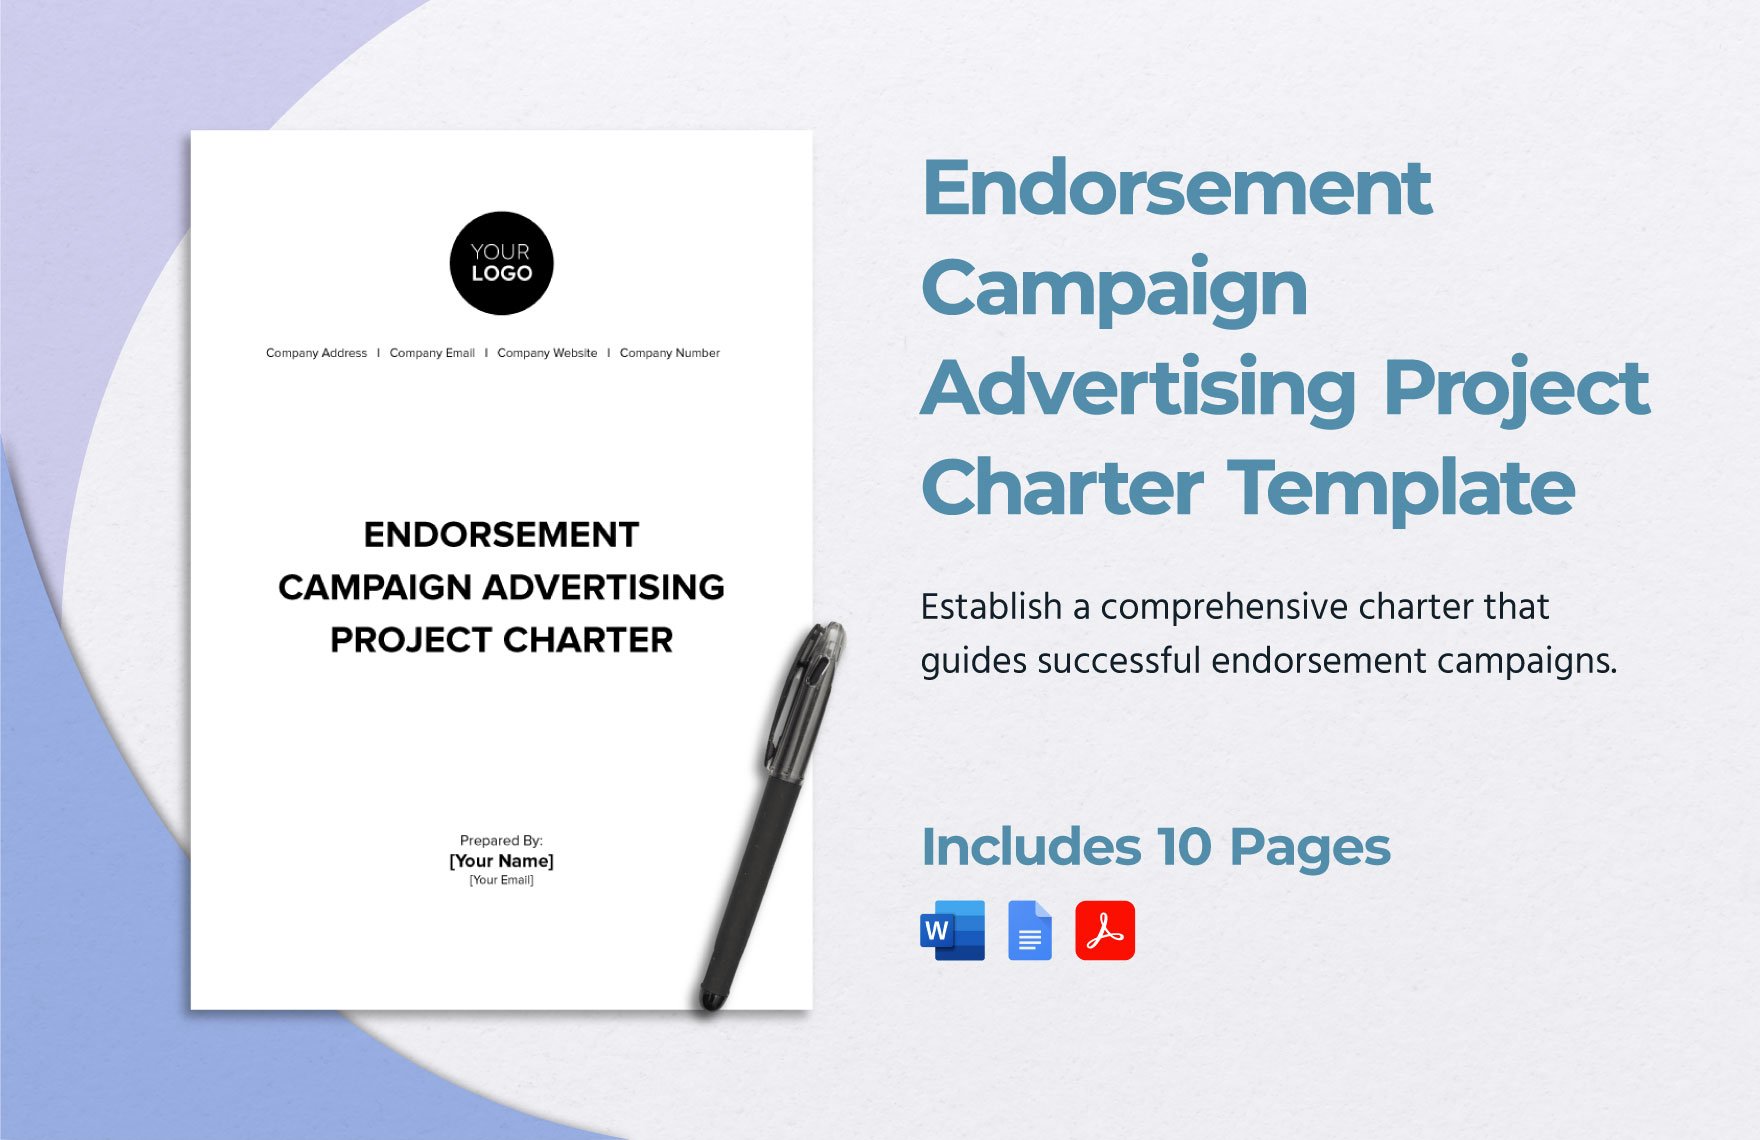 Endorsement Campaign Advertising Project Charter Template